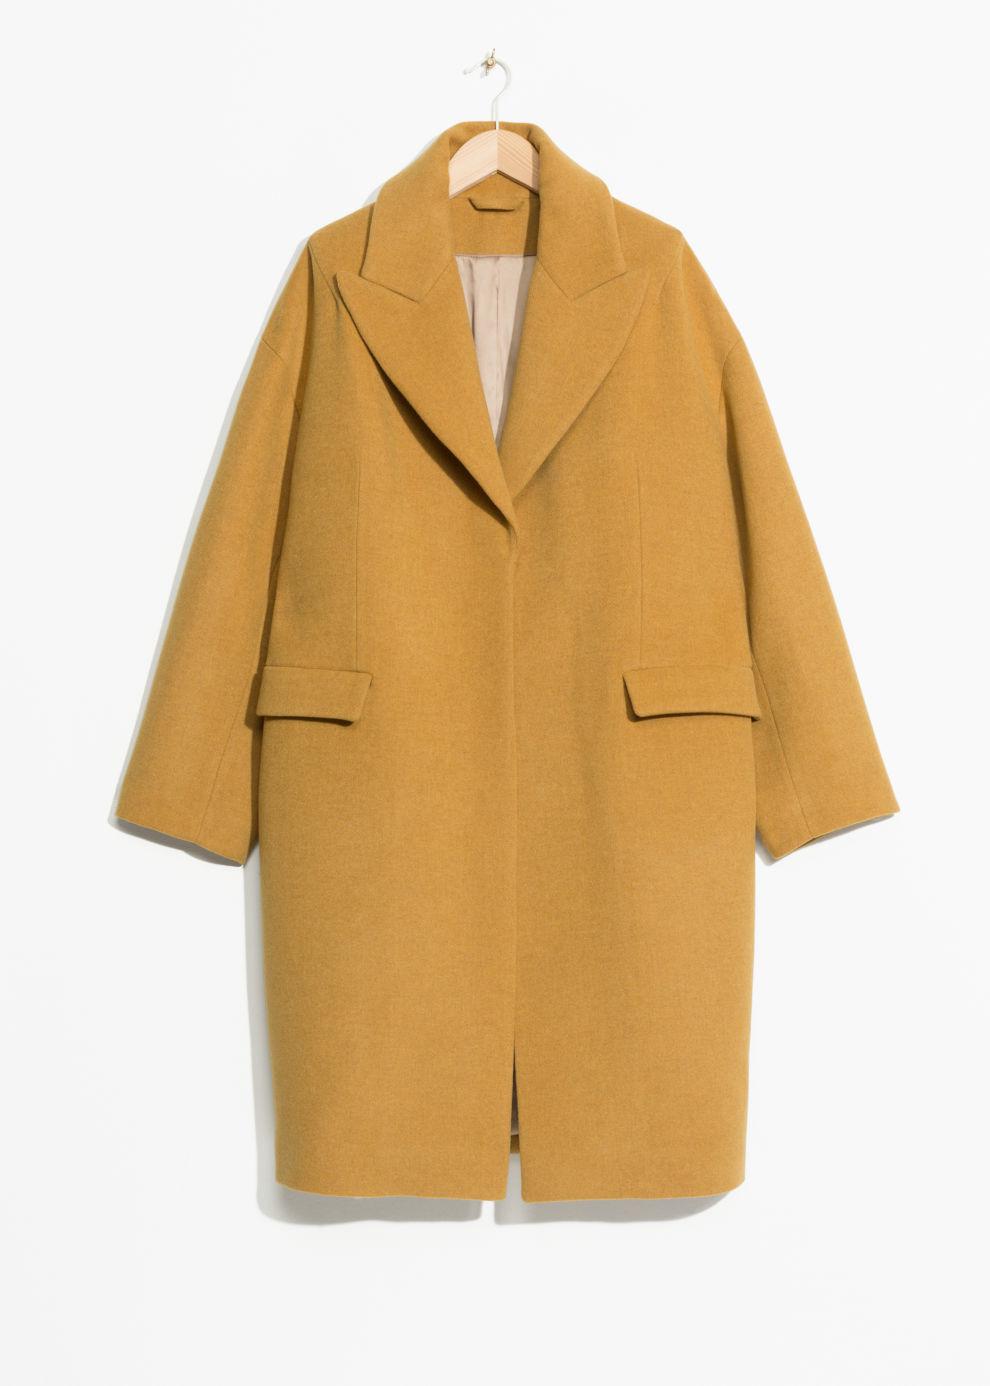 & Other Stories Wool Blend Oversized Coat in Yellow - Lyst